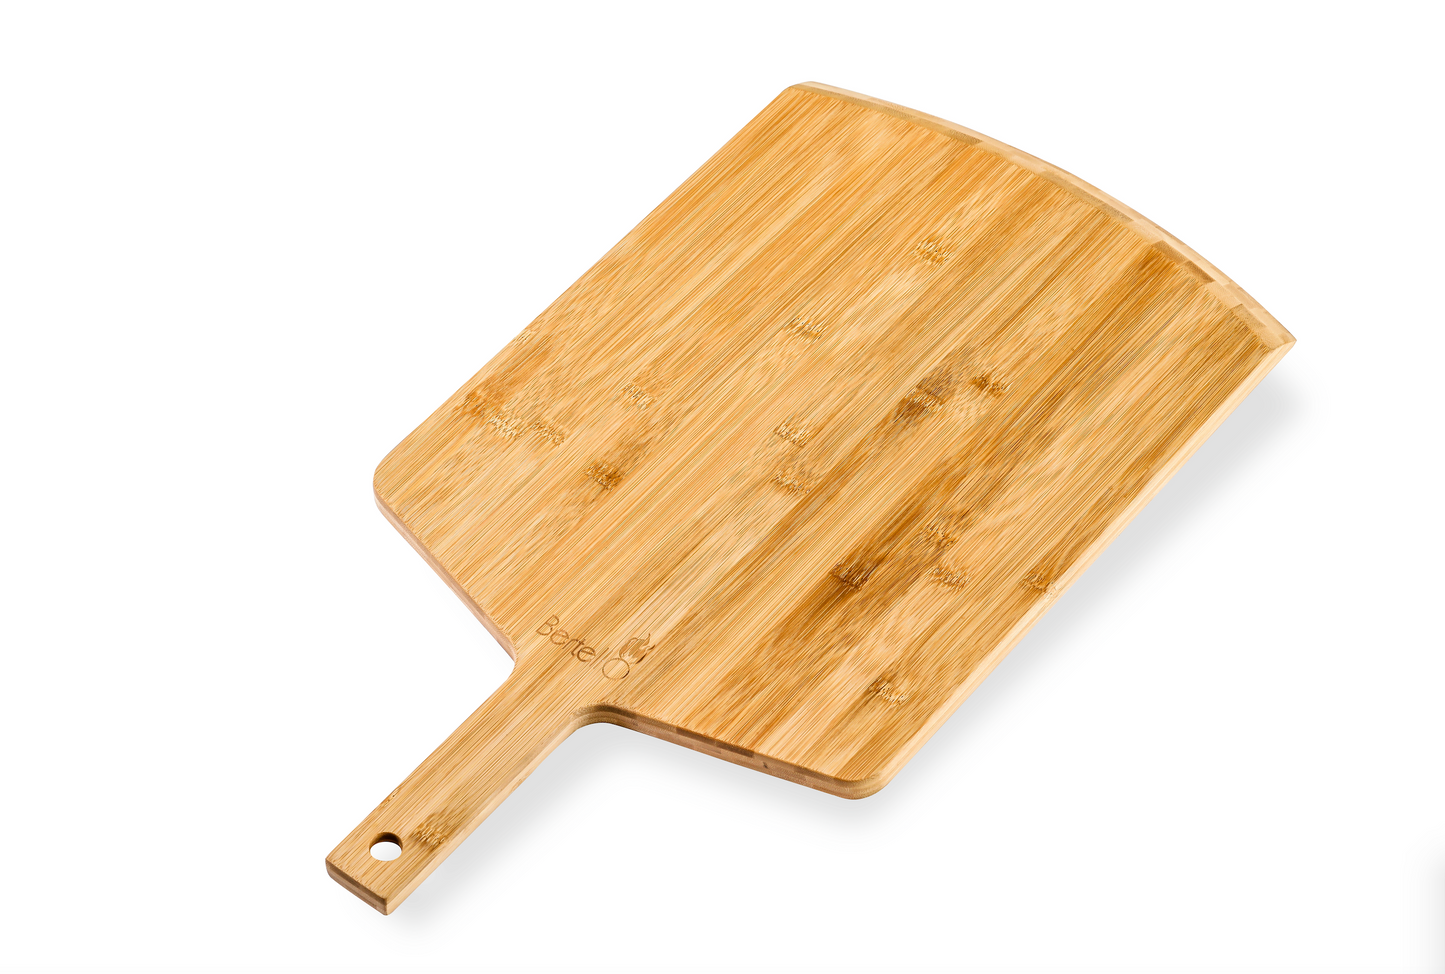 Buy a Flaming Coals Wooden Pizza Peel online and we can ship it